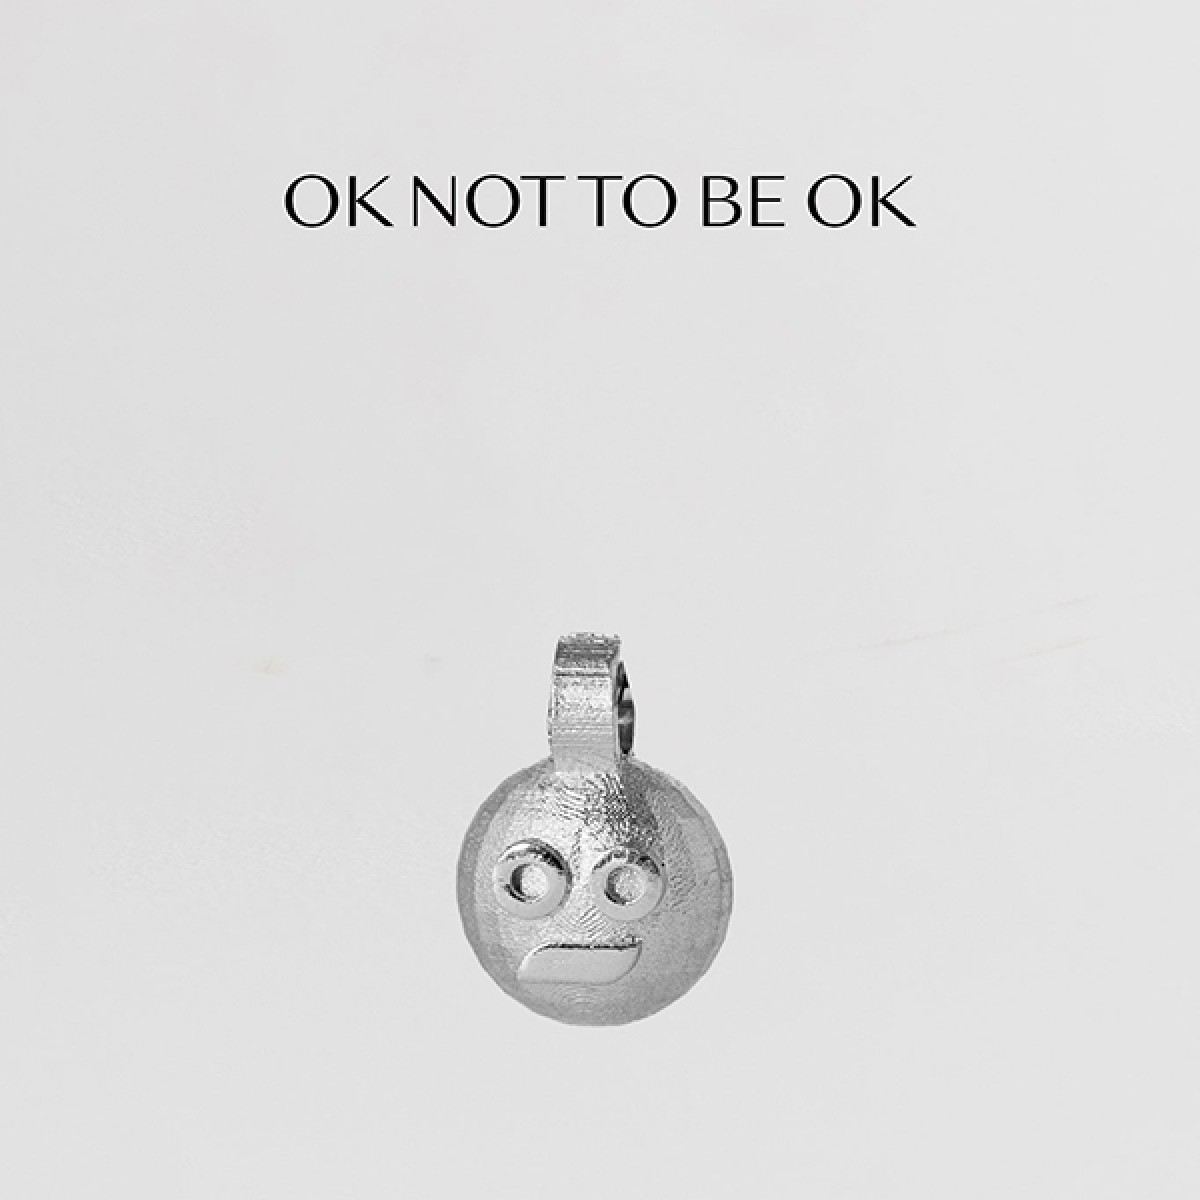 related by objects - vibe necklace - it's ok to be not ok - 925 Sterlingsilber - feinversilbert 